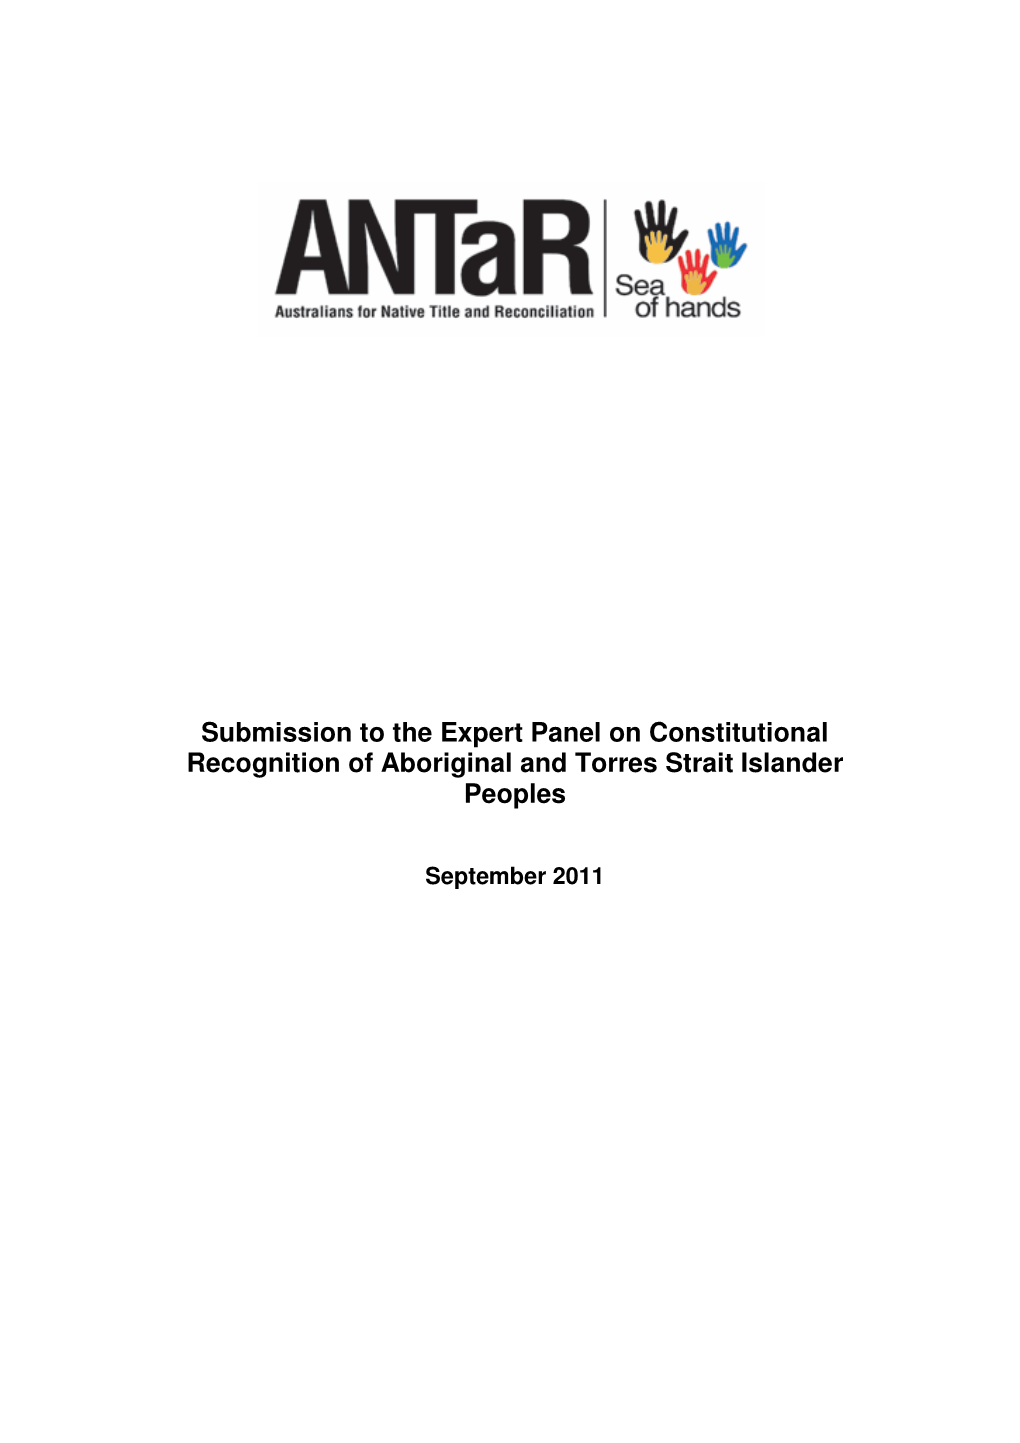 Submission to the Expert Panel on Constitutional Recognition of Aboriginal and Torres Strait Islander Peoples